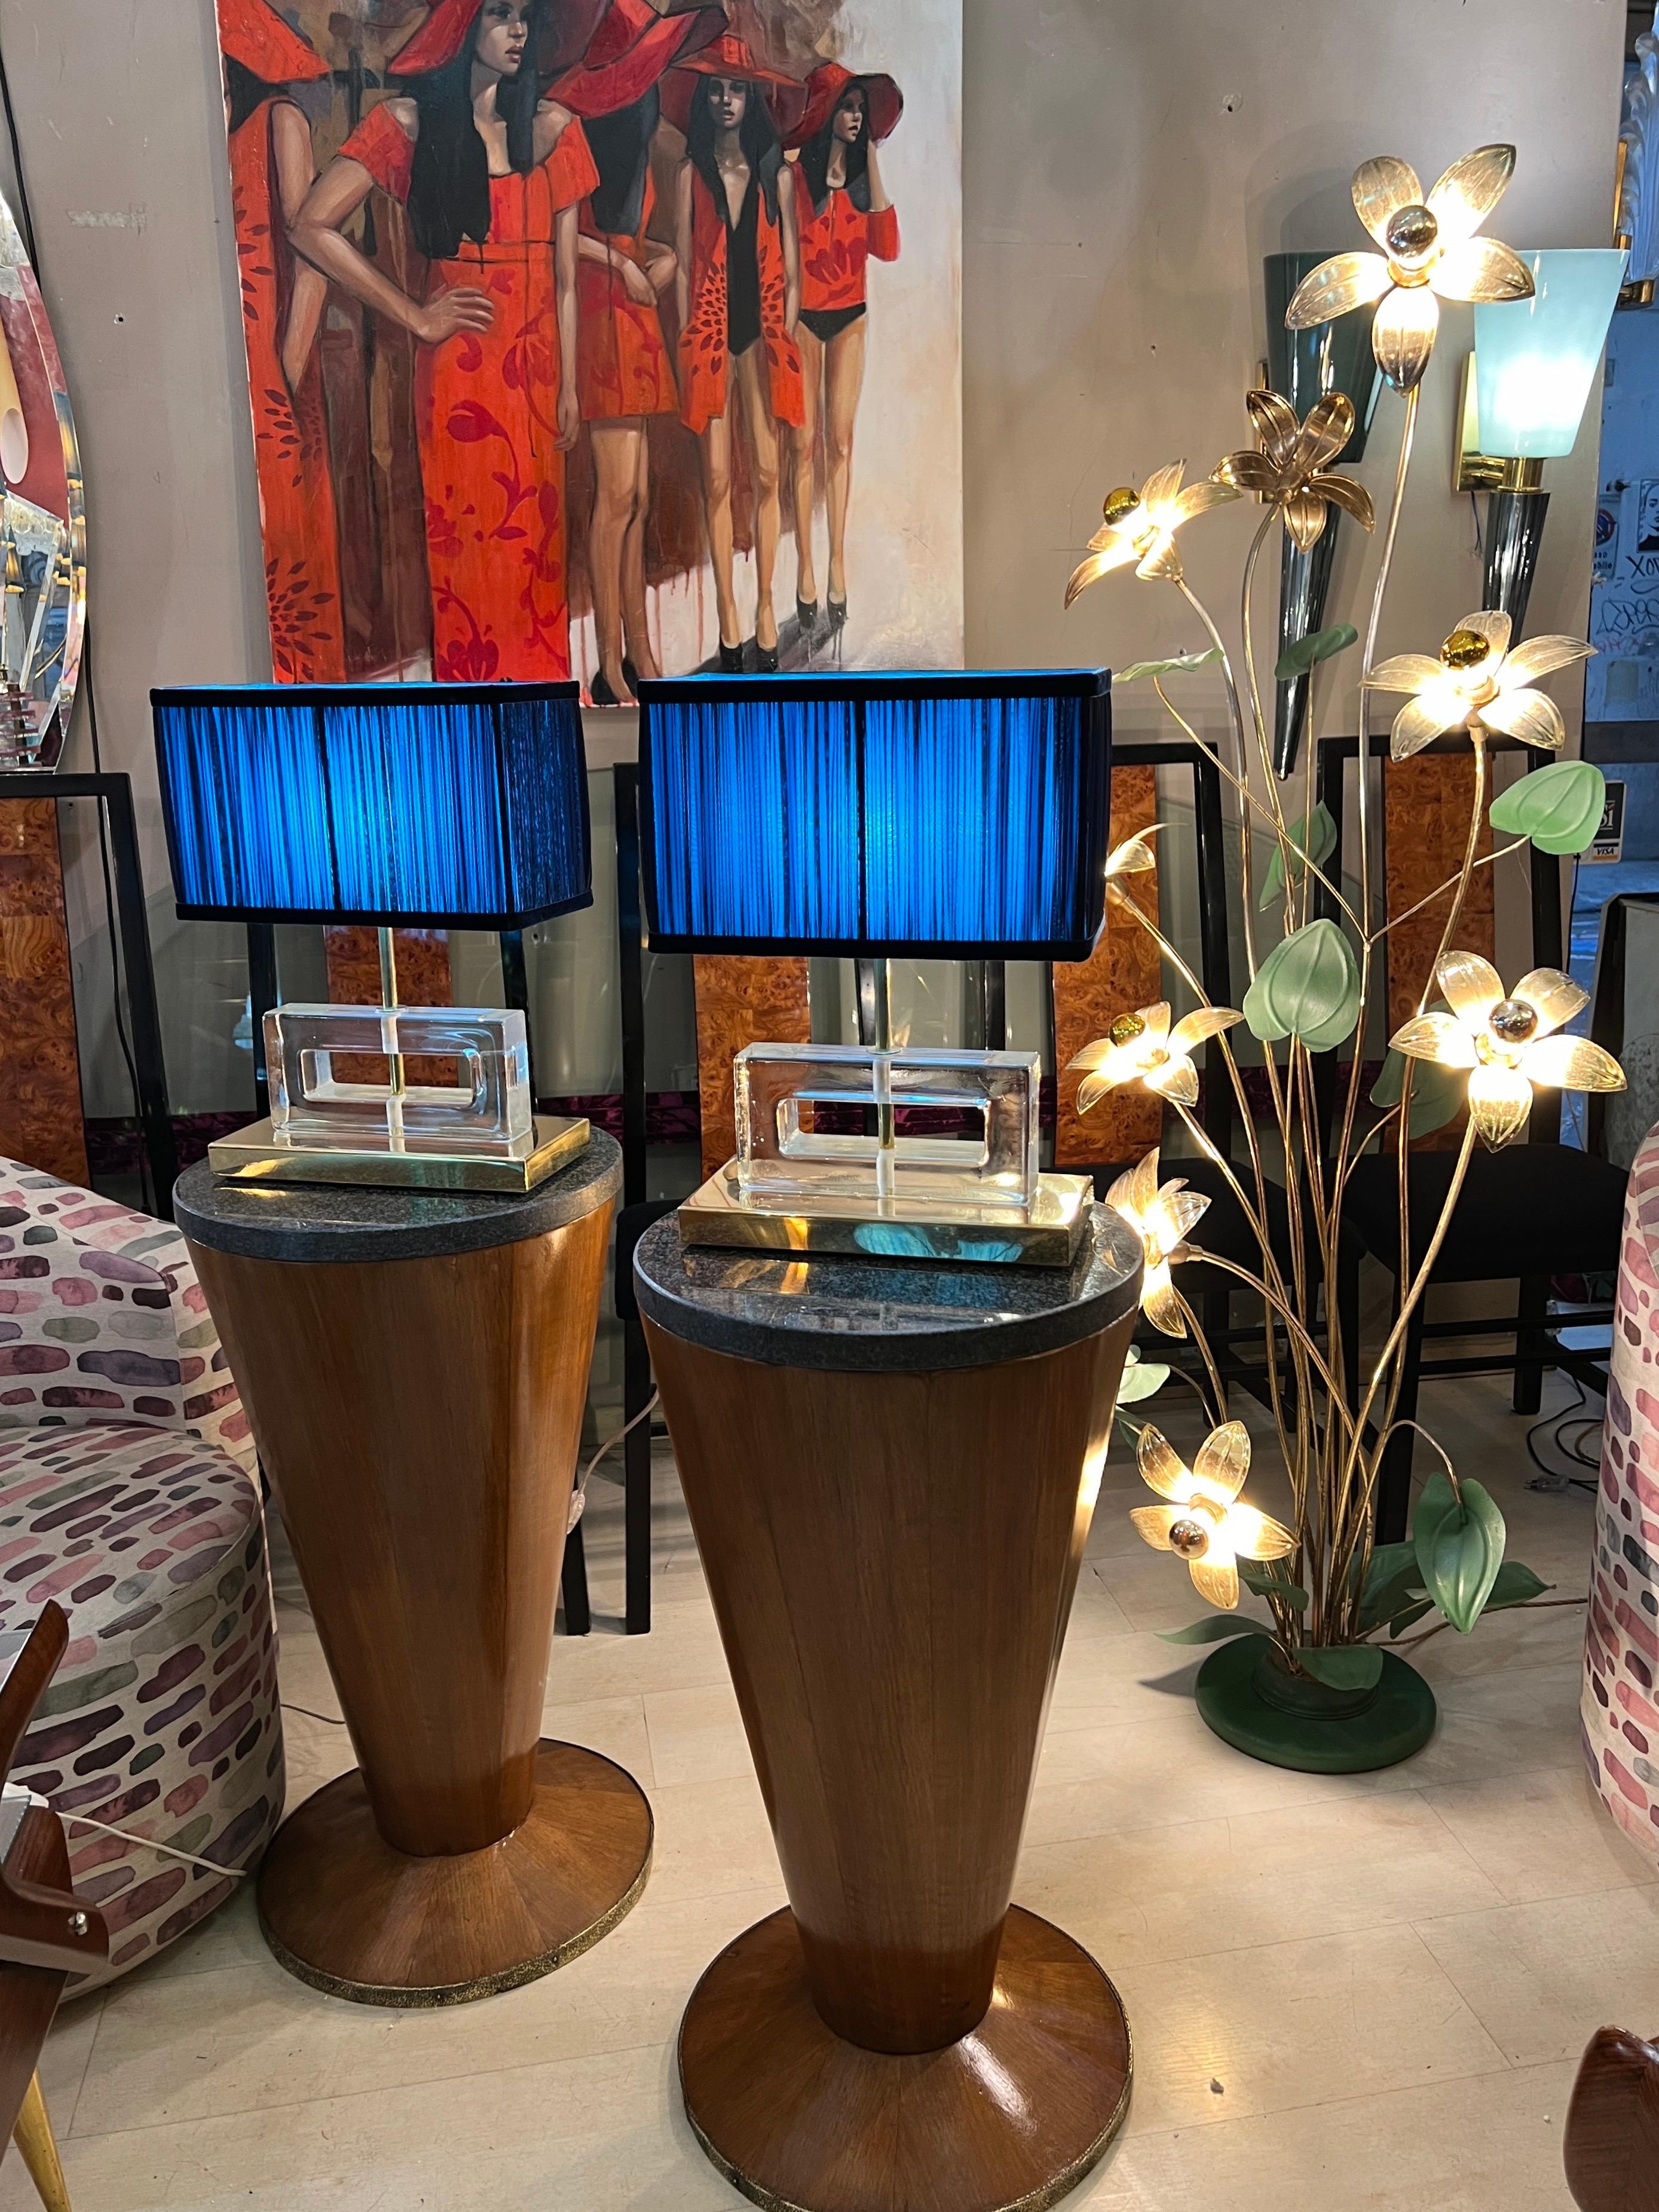 Clear Murano glass blocks lamps ice effect with brass base and our hand sewn blue and turquoise lampshades.
The geometric clear glass blocks are solid, thick and heavy.
The double color lampshades are handmade in our internal laboratory using